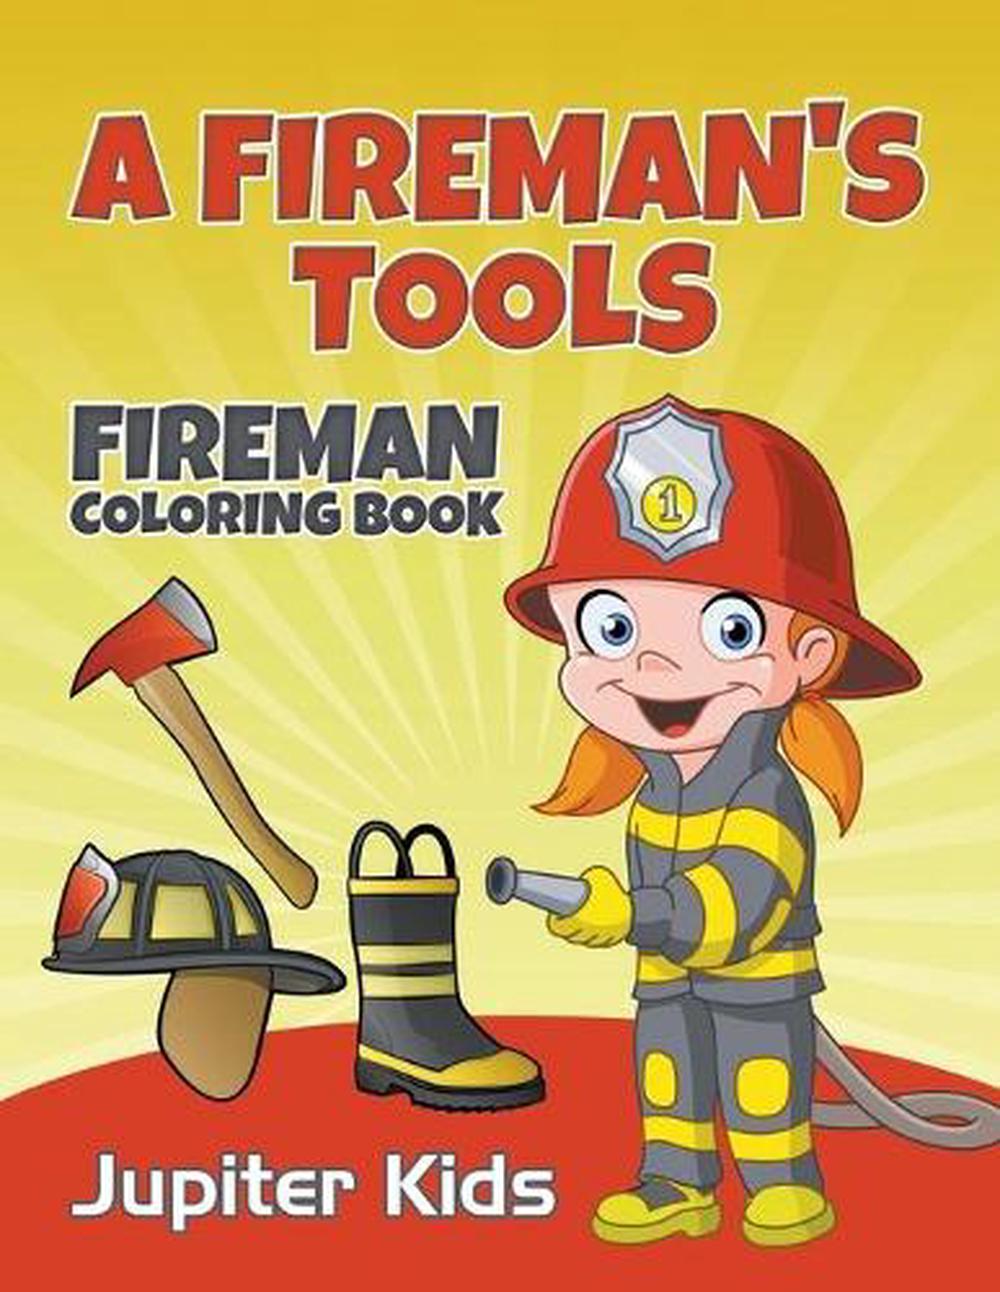 the fireman book review